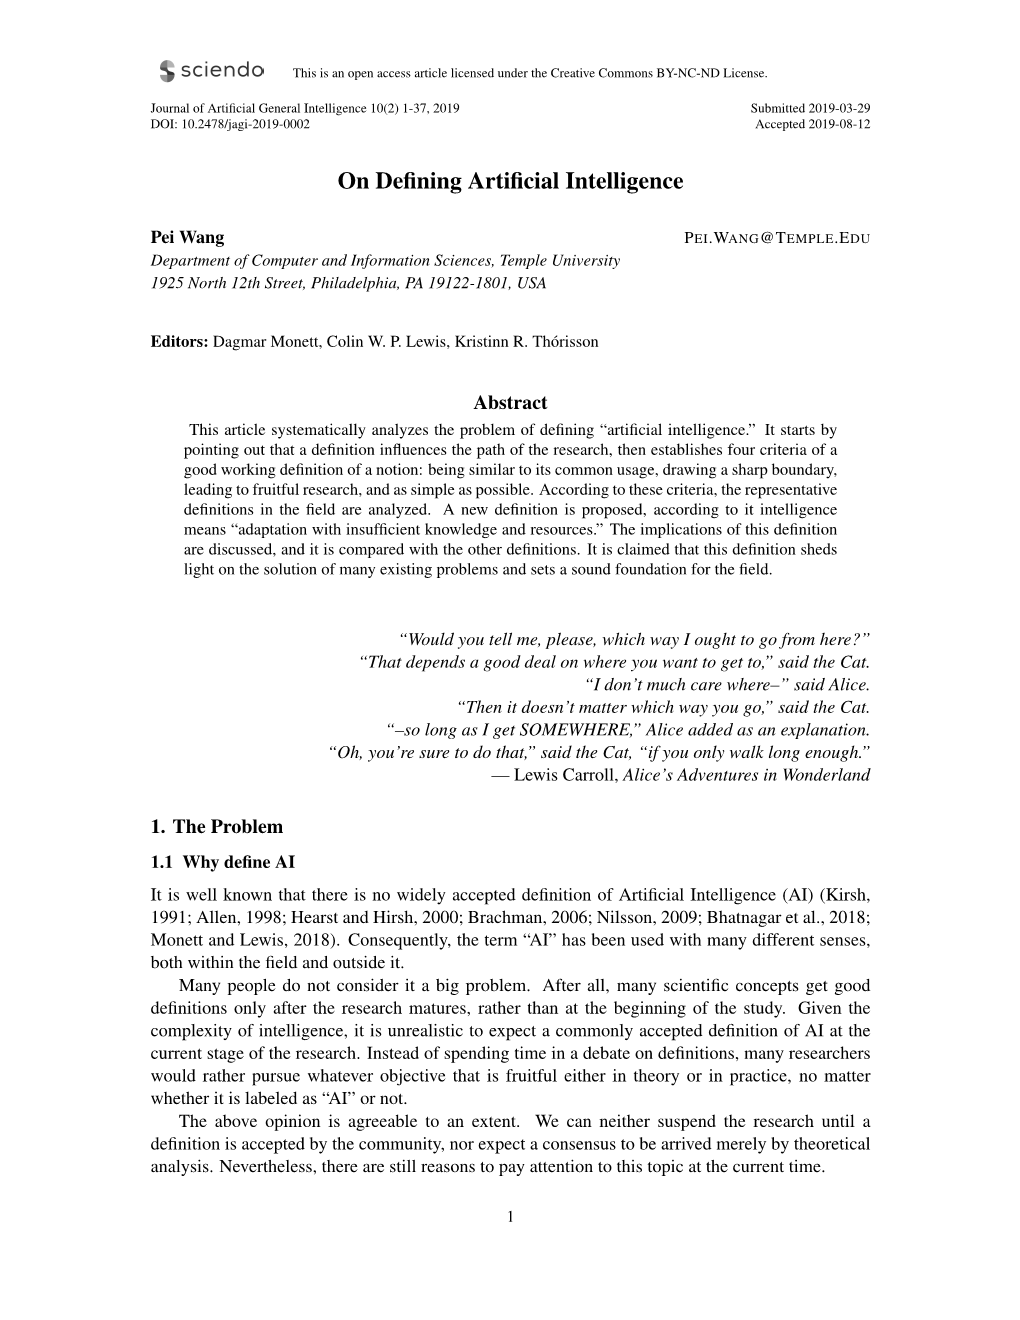 On Defining Artificial Intelligence